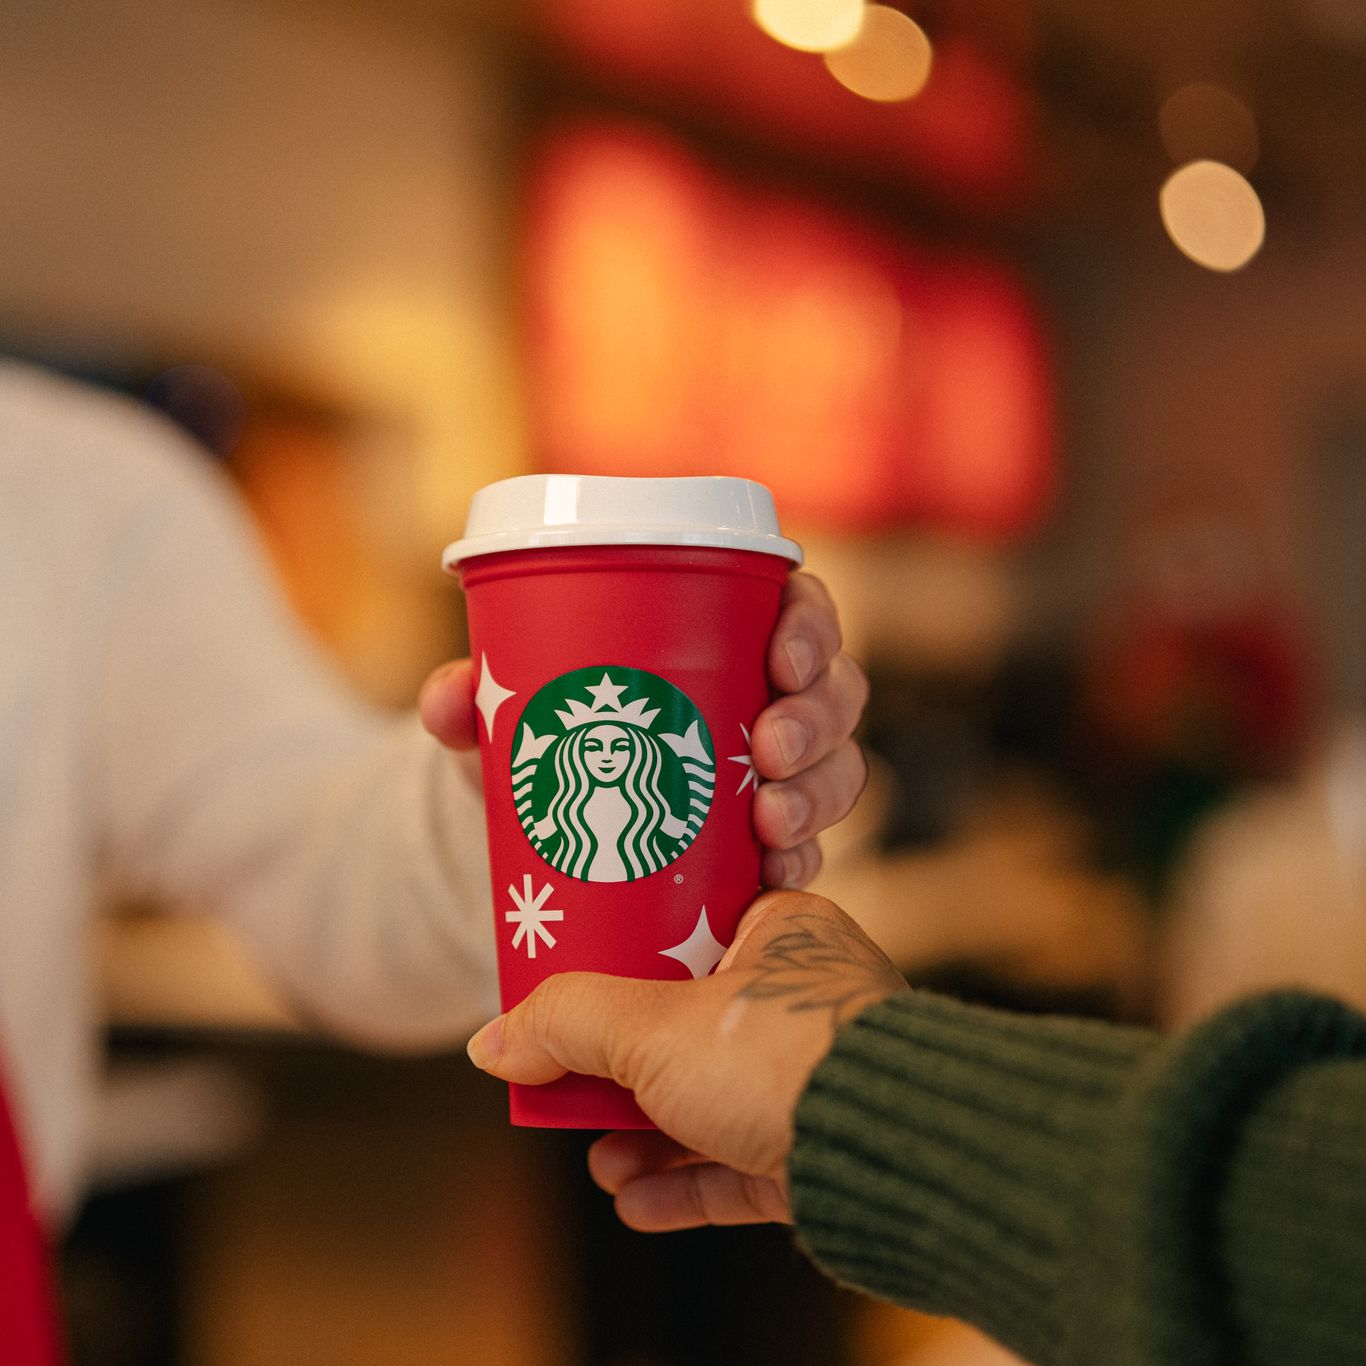 Starbucks reusable red and holiday cups return - Good Morning America